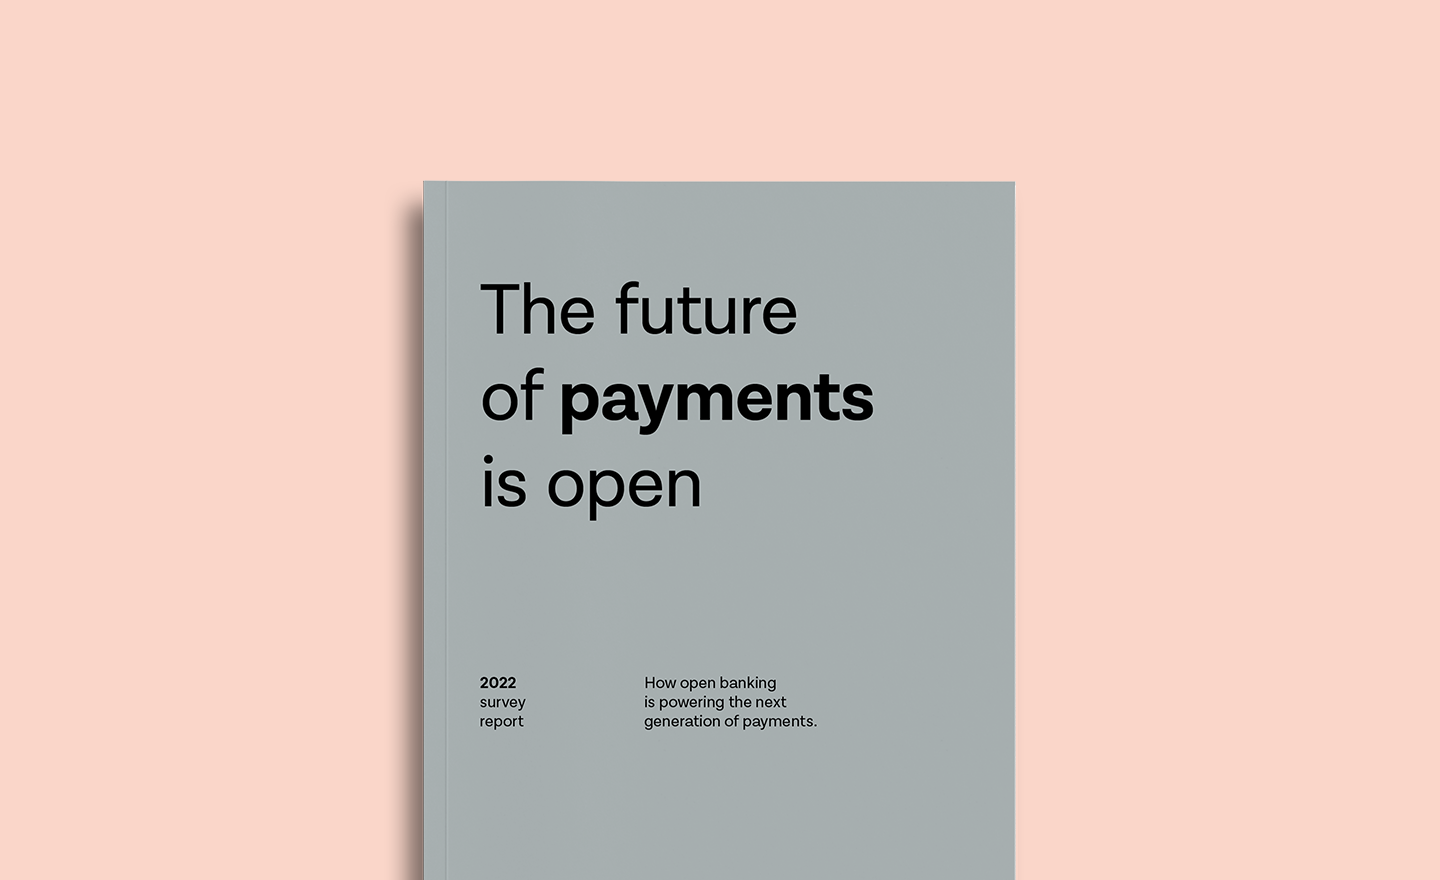 A new generation of payments is taking shape – powered by open banking